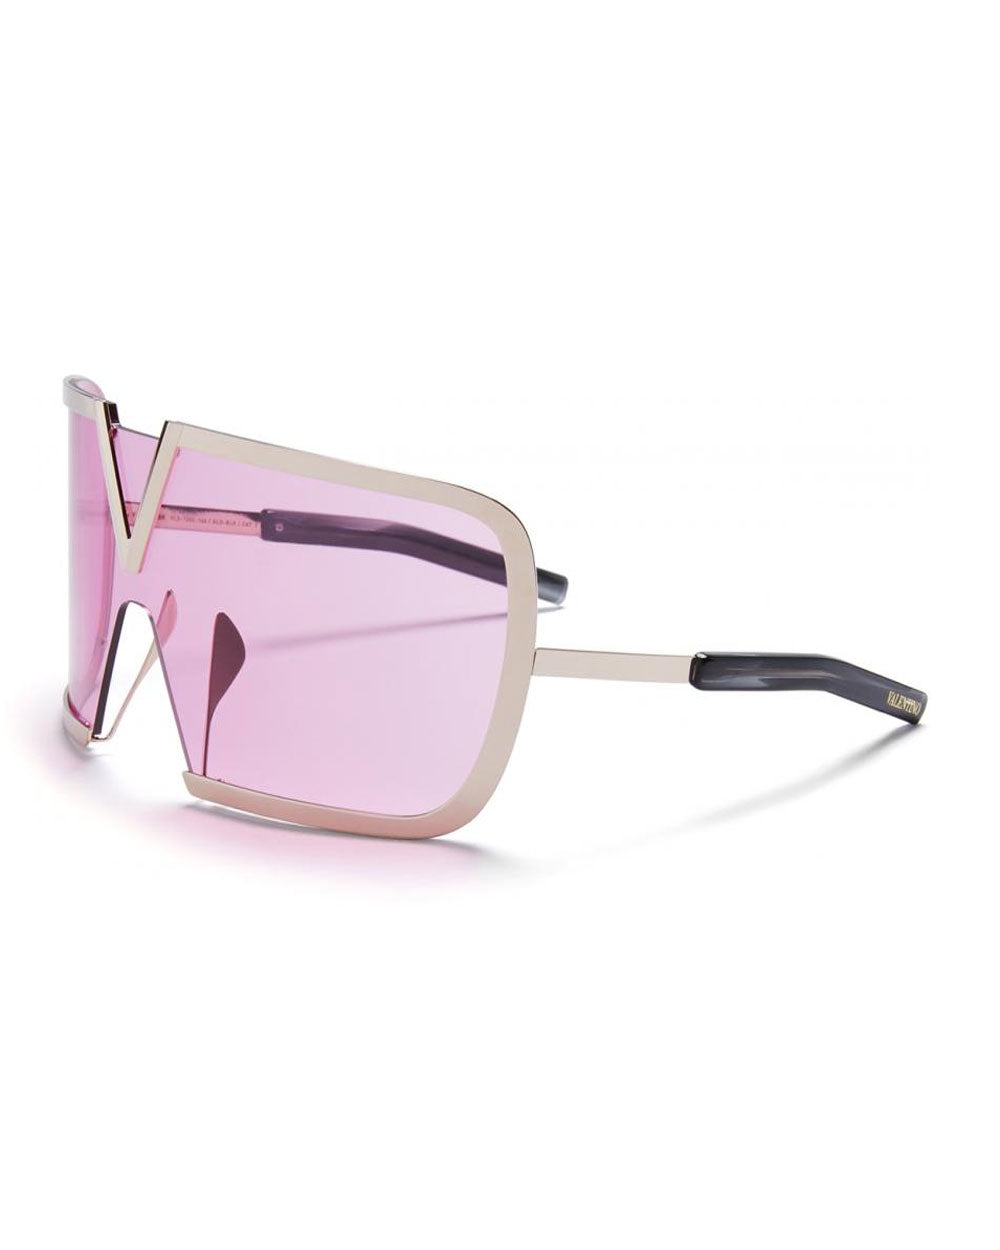 Romask Sunglasses in Pink